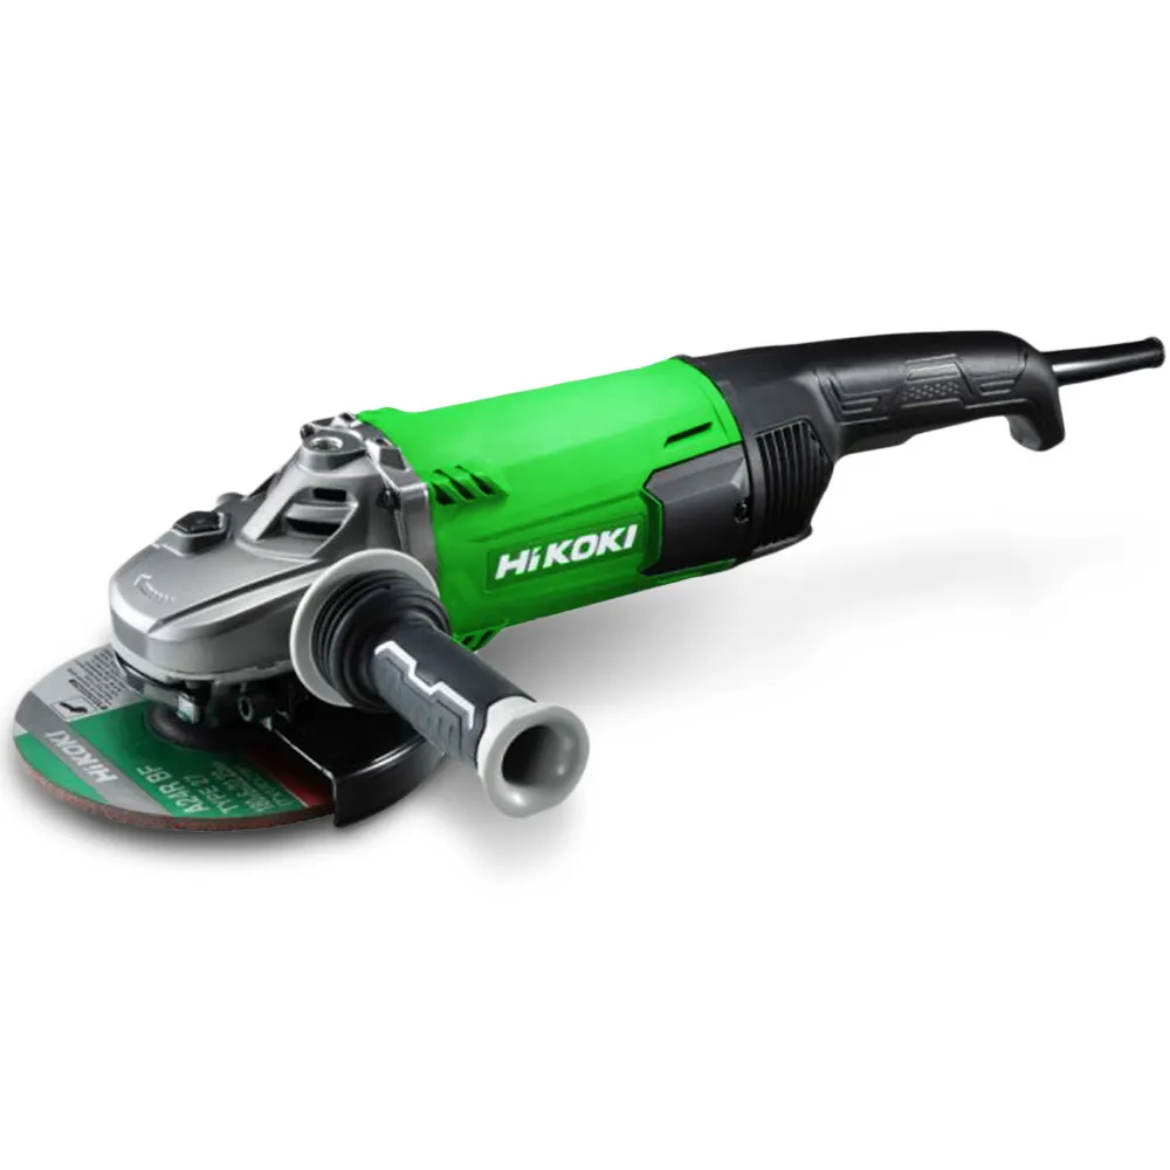 Picture of HiKOKI 2400W Angle Grinder 180mm with Trigger (Deadman) Switch